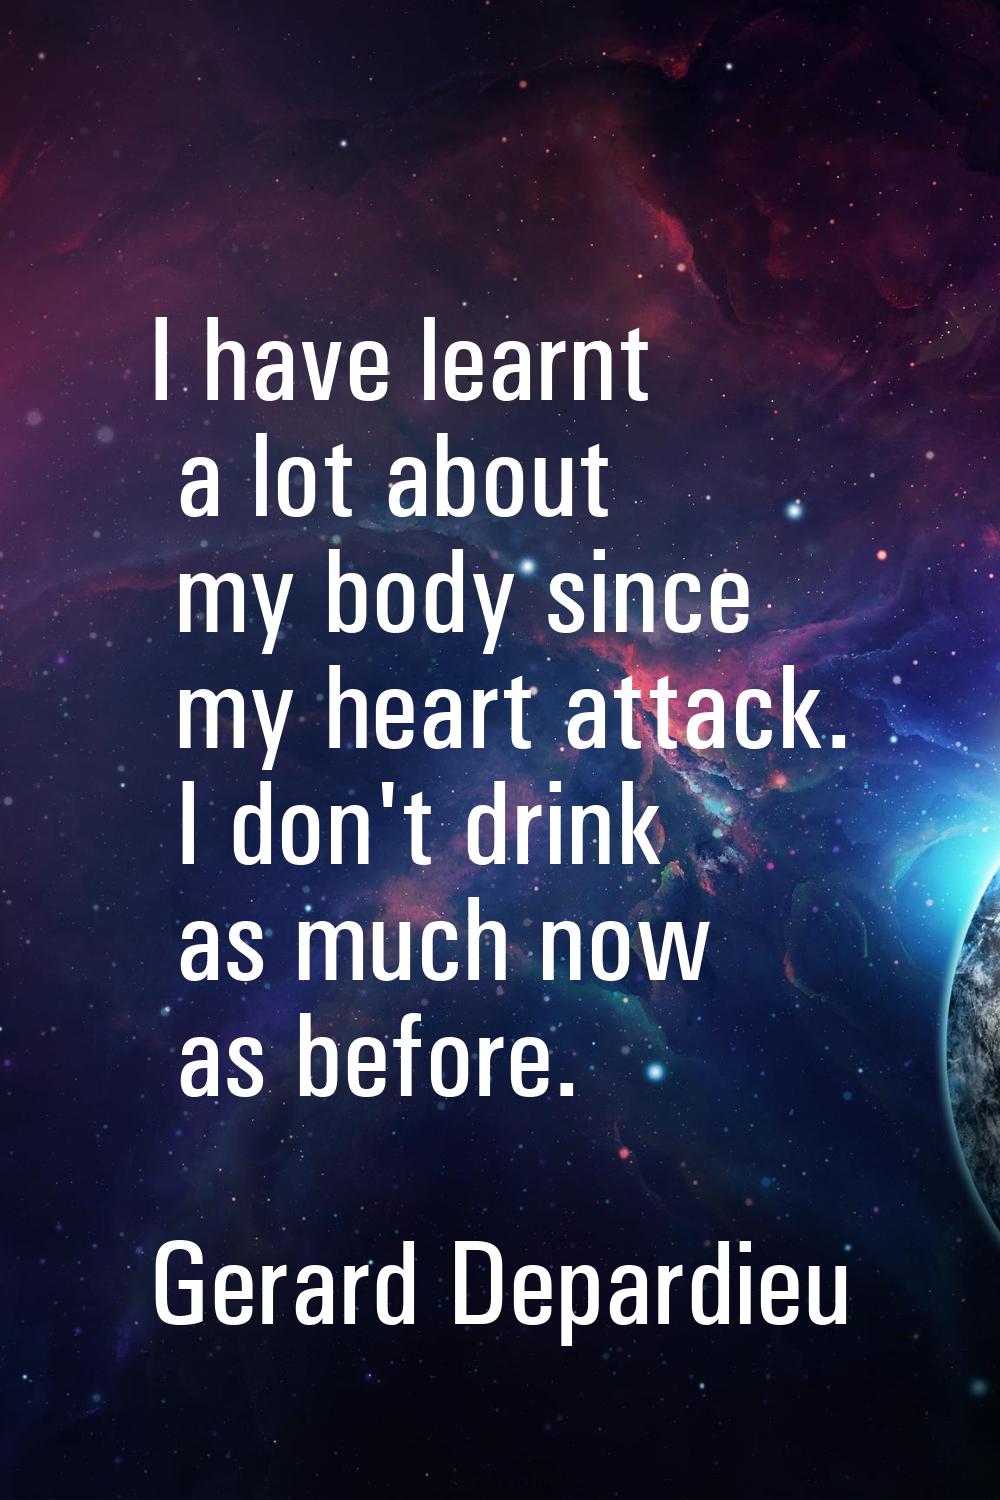 I have learnt a lot about my body since my heart attack. I don't drink as much now as before.